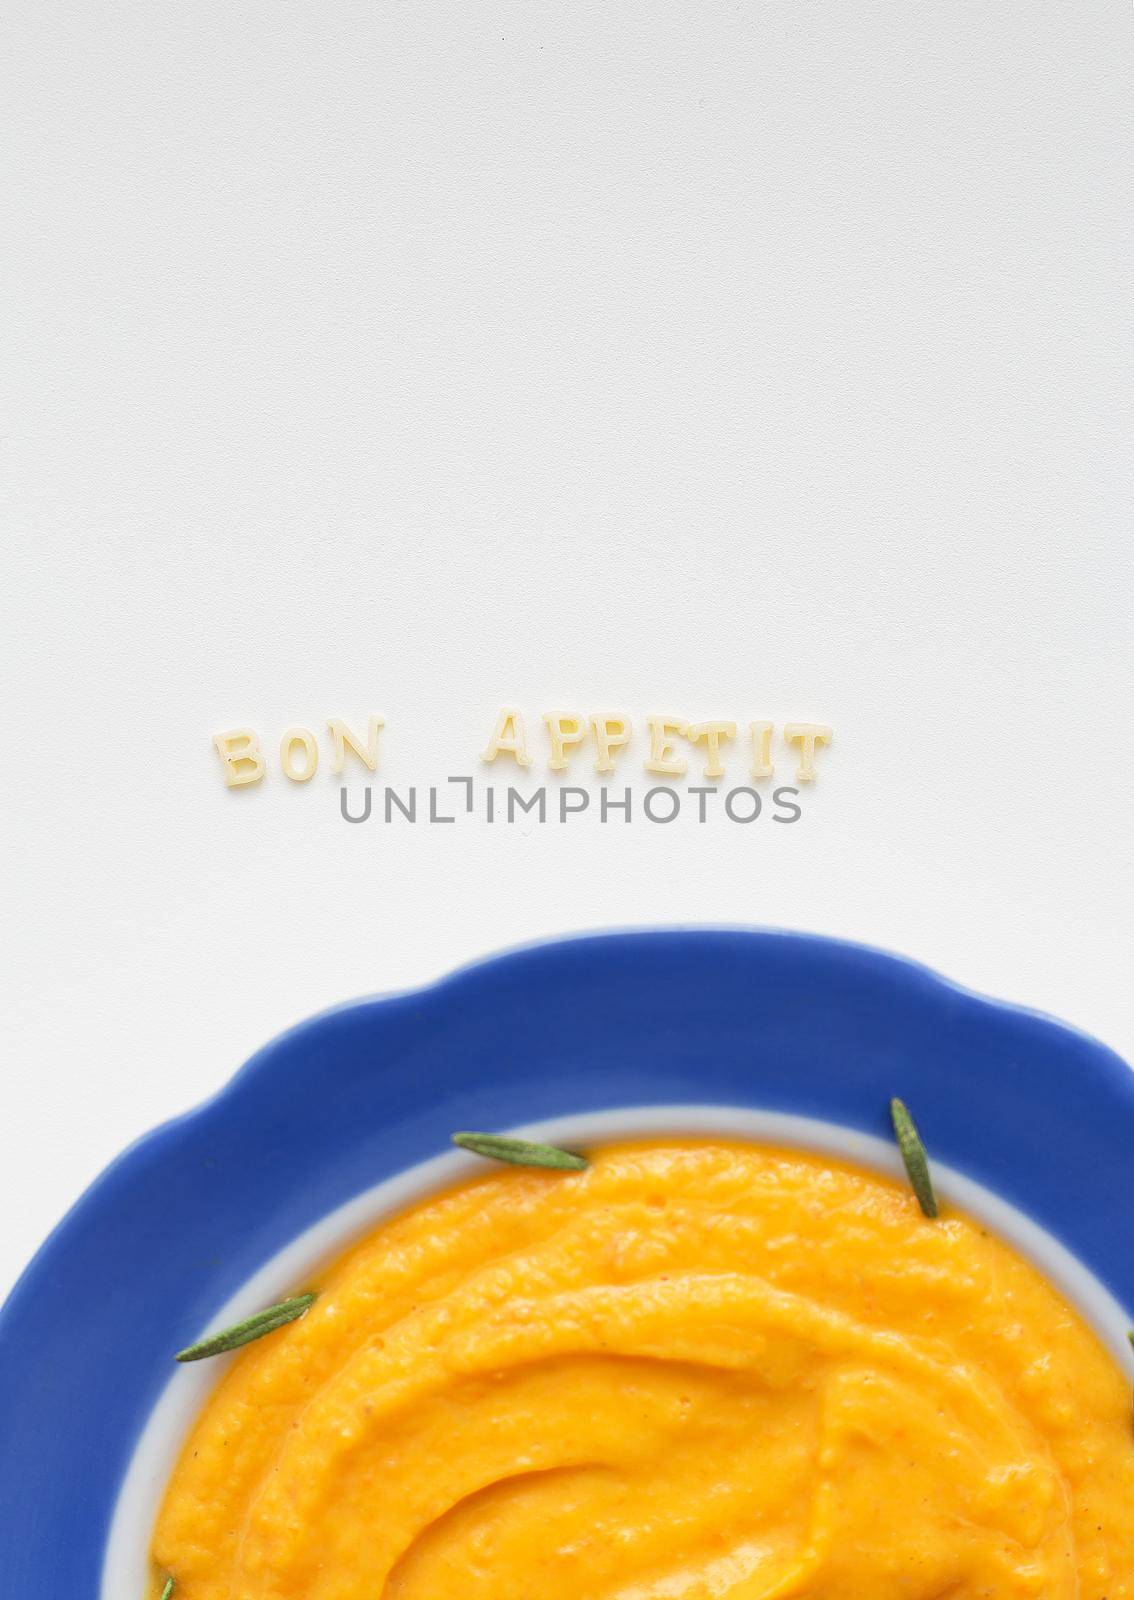 pumpkin soup in a blue plate on a napkin with flowers close-up